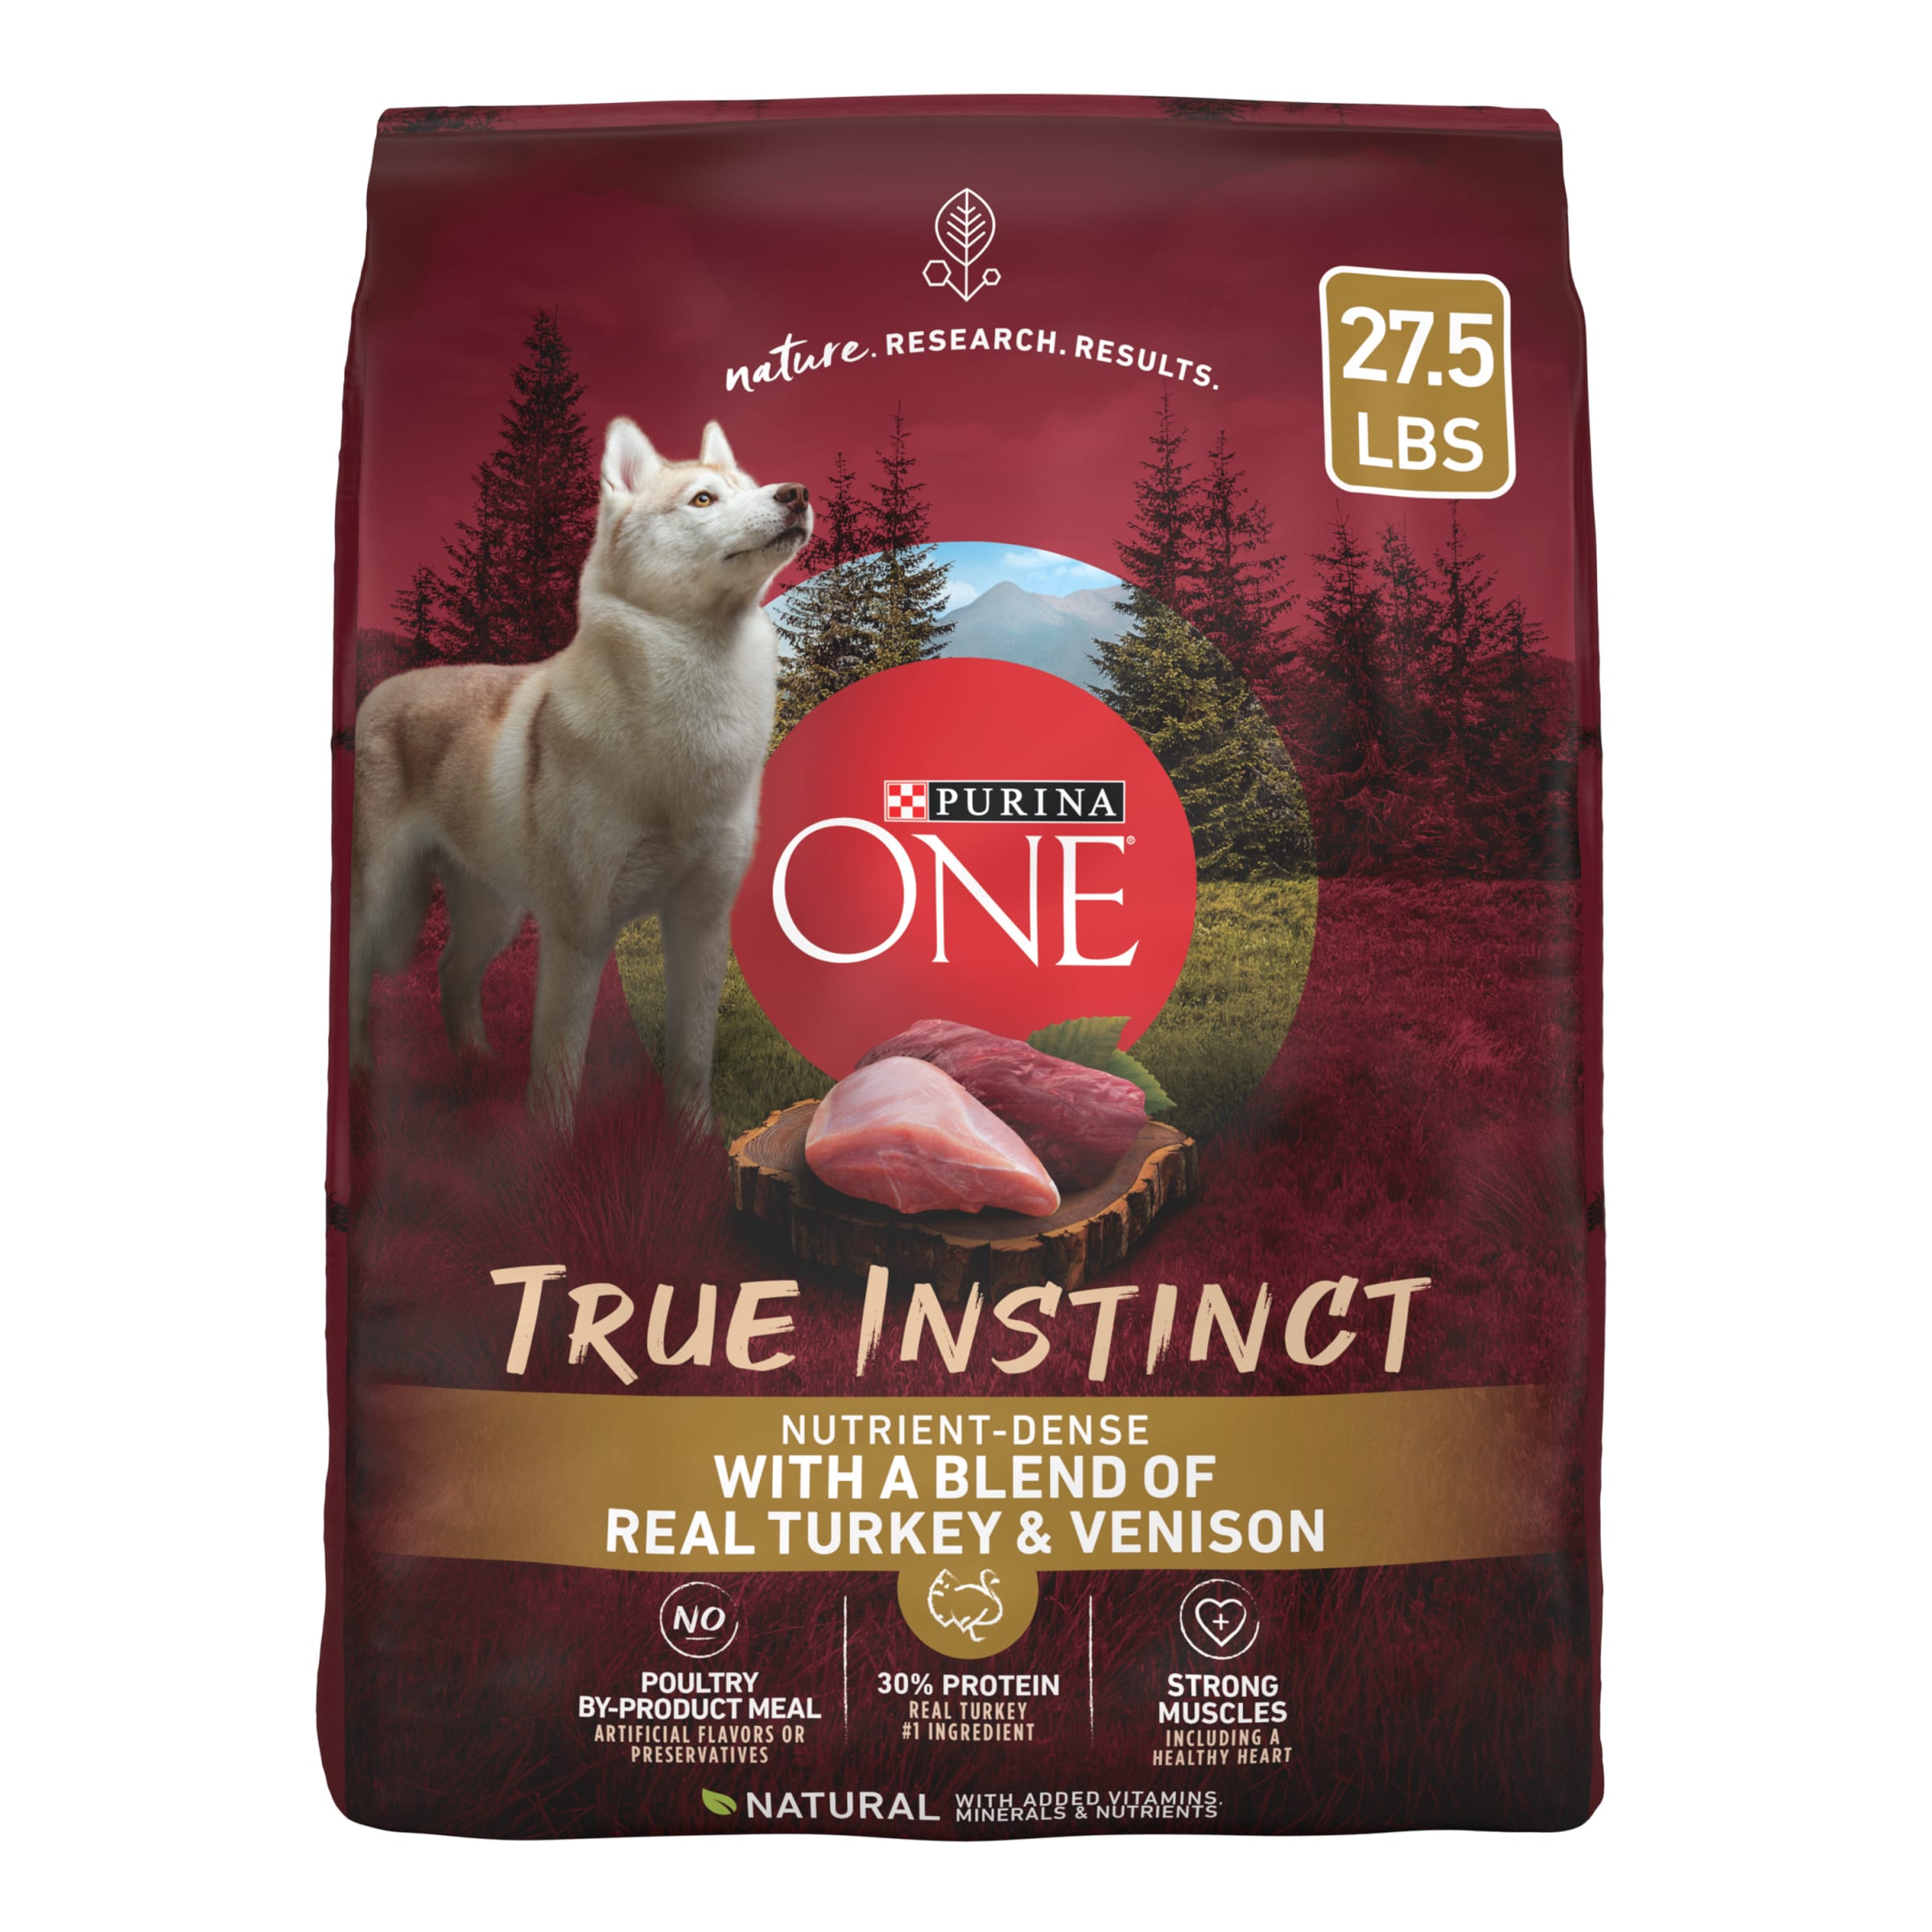 Purina One True Instinct Dry Dog Food for Adult Dogs, Real Turkey & Venison, 27.5 lb Bag - image 1 of 10